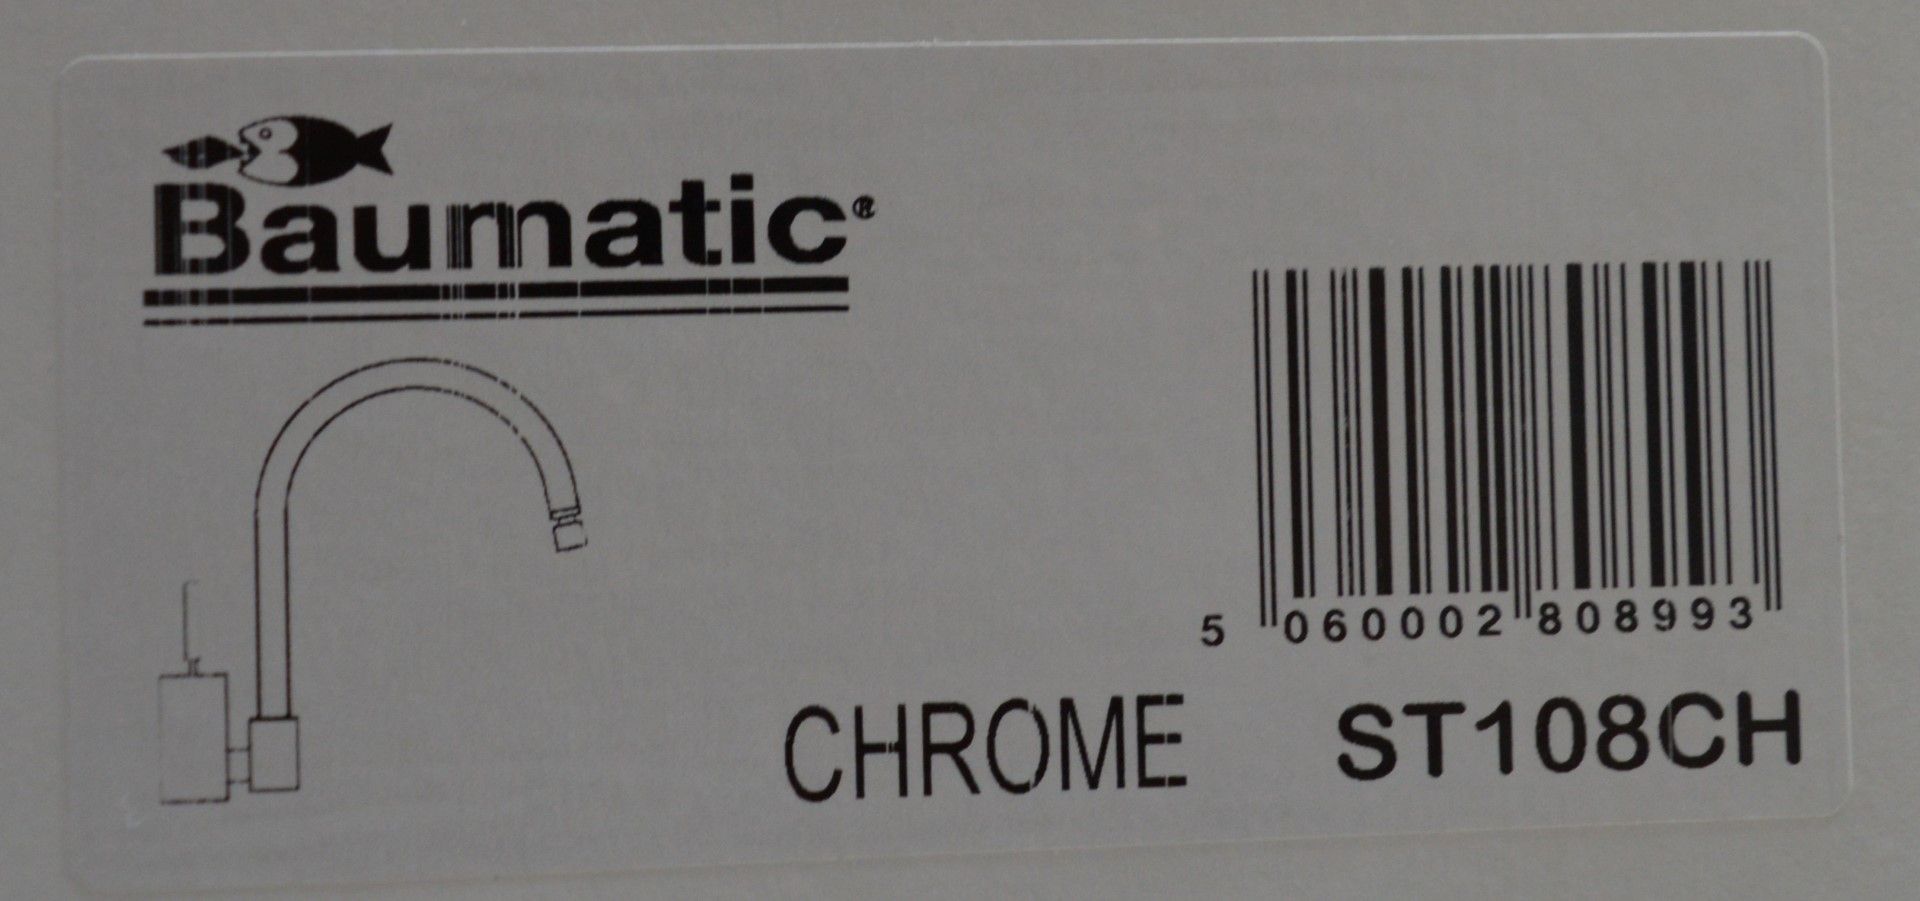 1 x Baumatic ST108CH Avalon Mixer Tap in Chrome – NEW & BOXED – CL053 – Location: Altrincham - Image 2 of 6